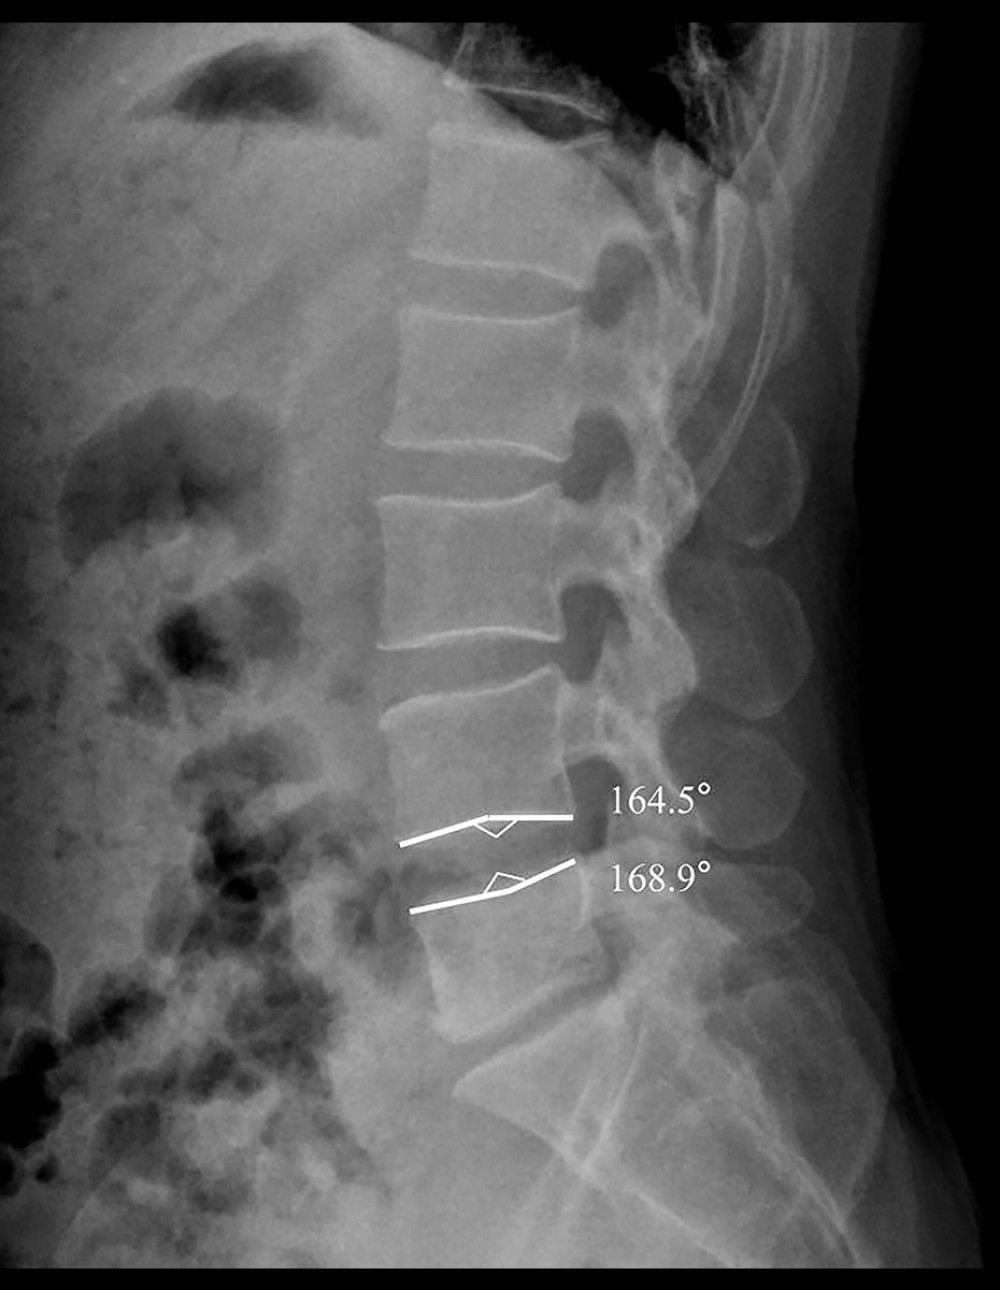 Measurement of the ECA: On the sagittal X-ray of the lumbar spine, the bone endplate of lumbar vertebra is in arc shape, and a line was drawn from the summit/bottom of arc along to the endpoints, and the angle between these 2 lines is defined as the ECA.